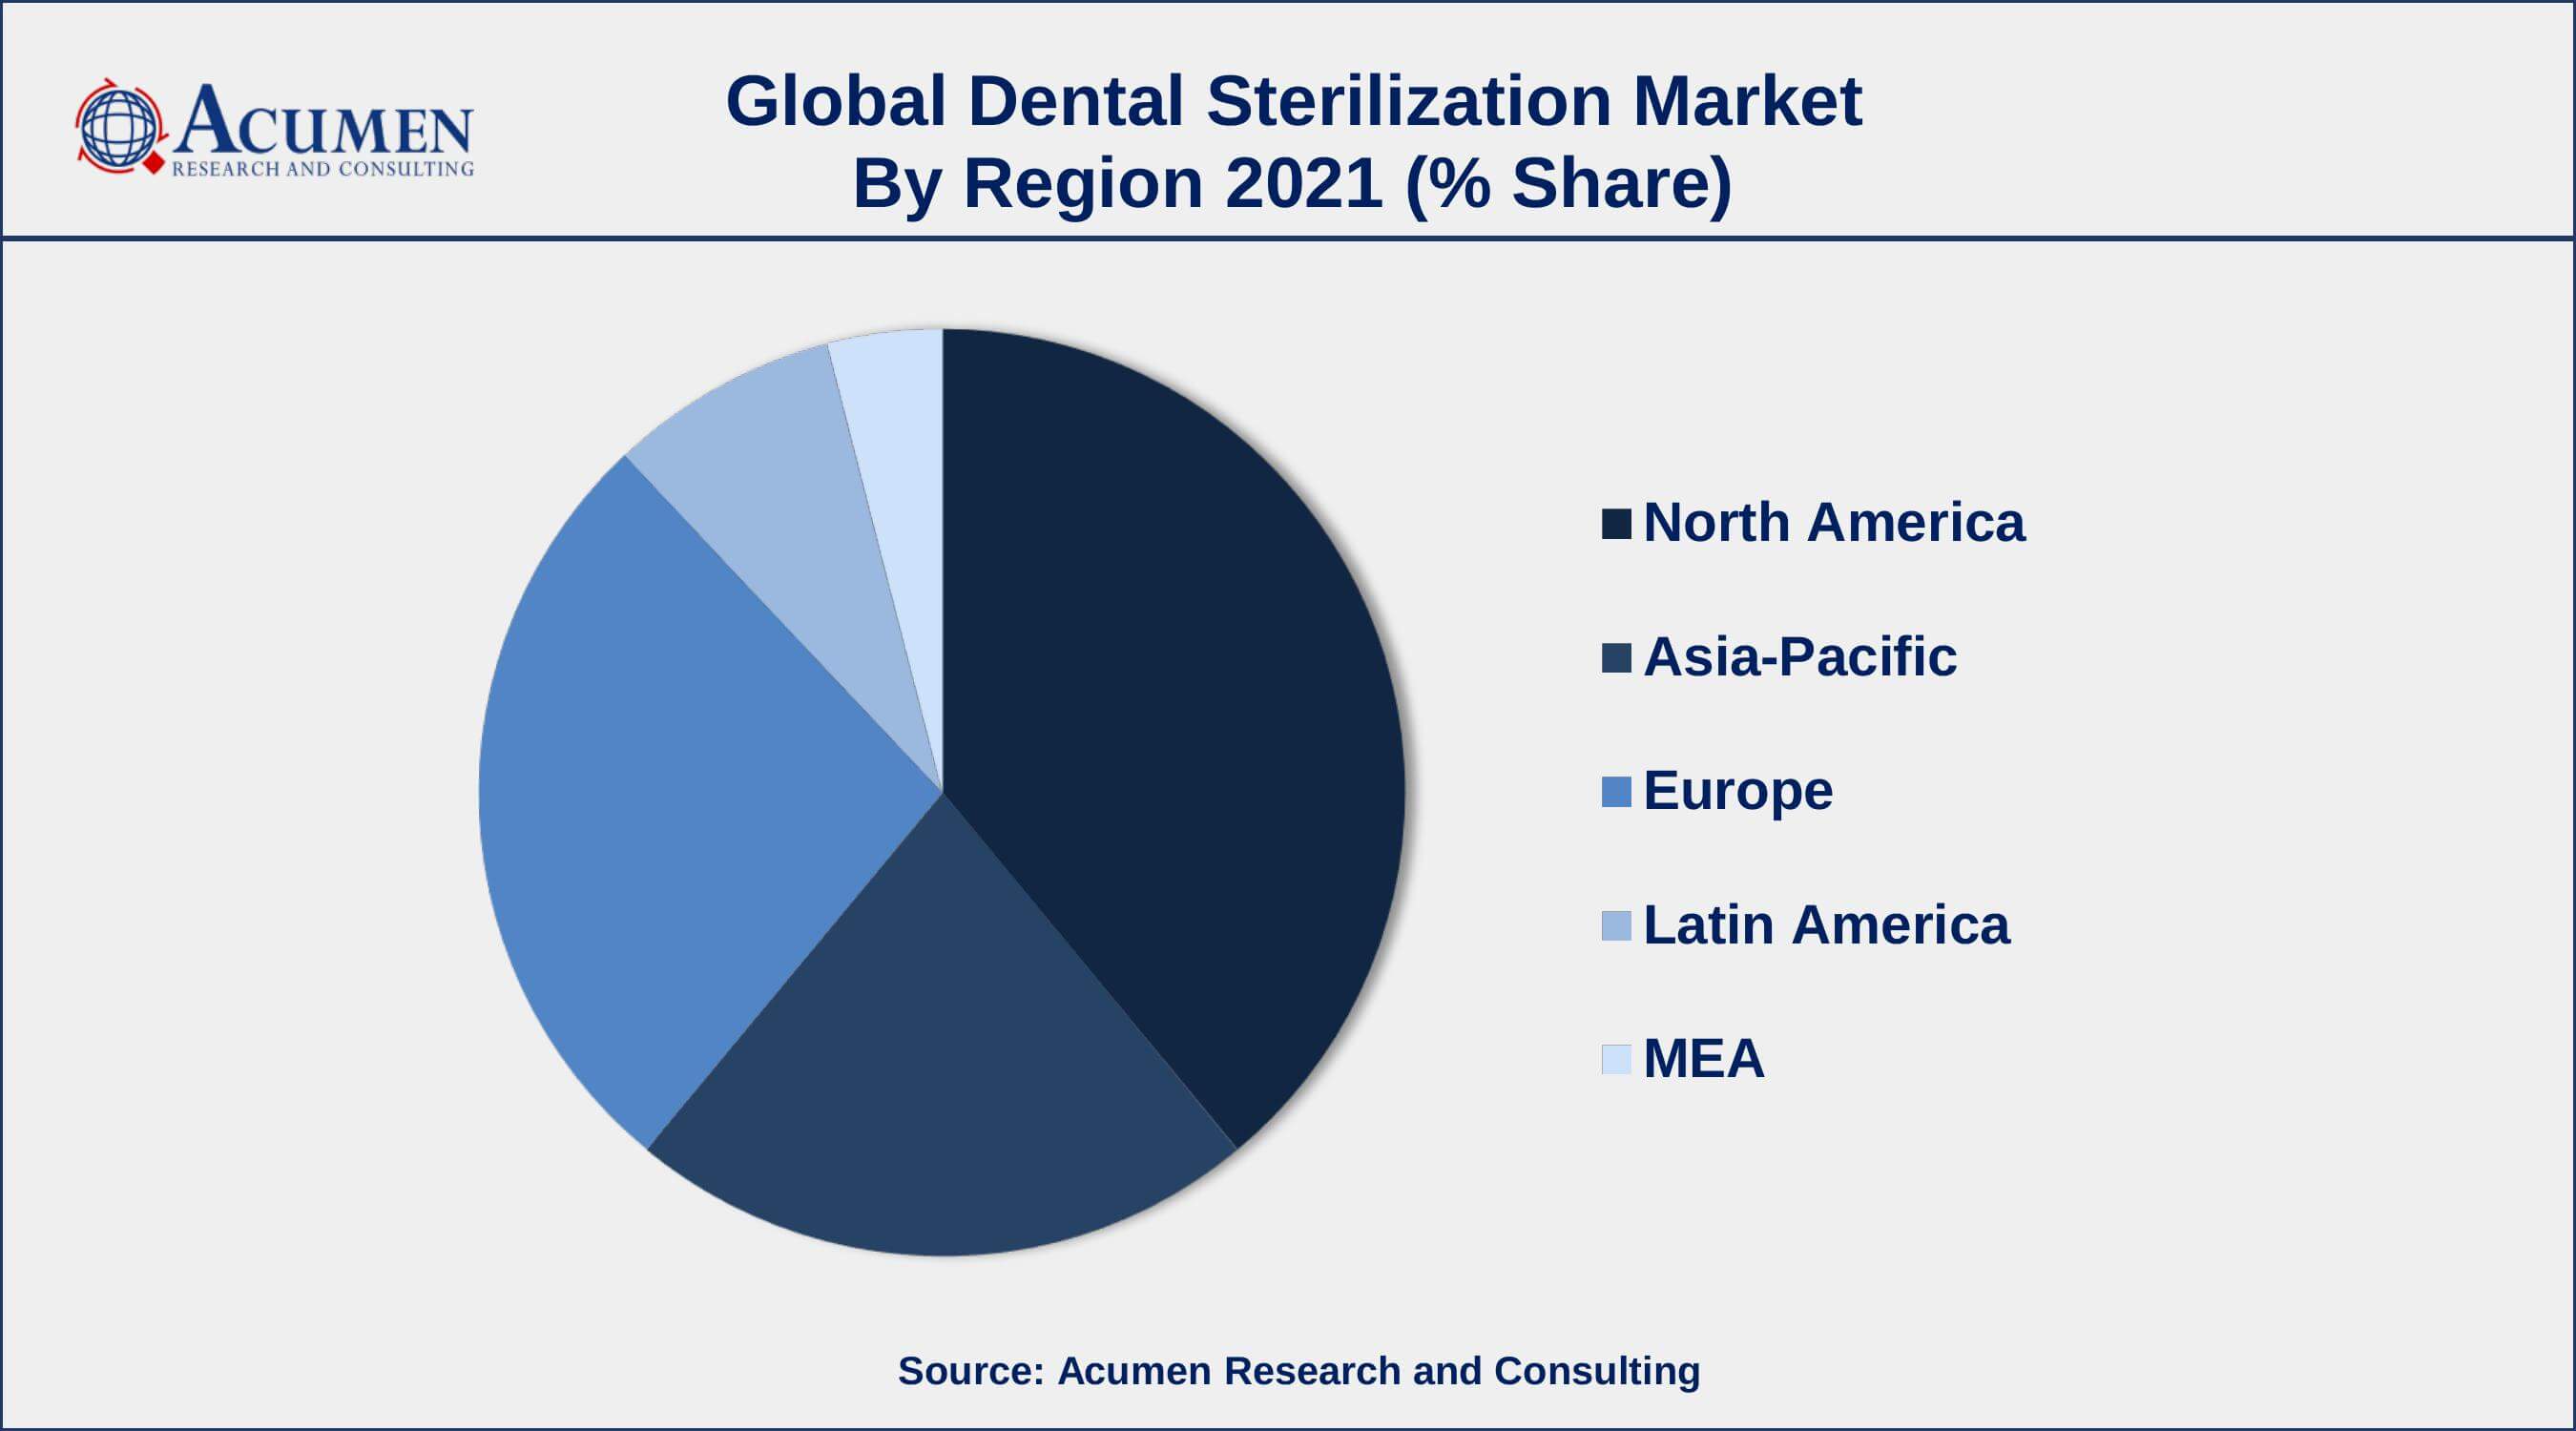 Rise in the number of dental surgical procedures, drives the dental sterilization market size